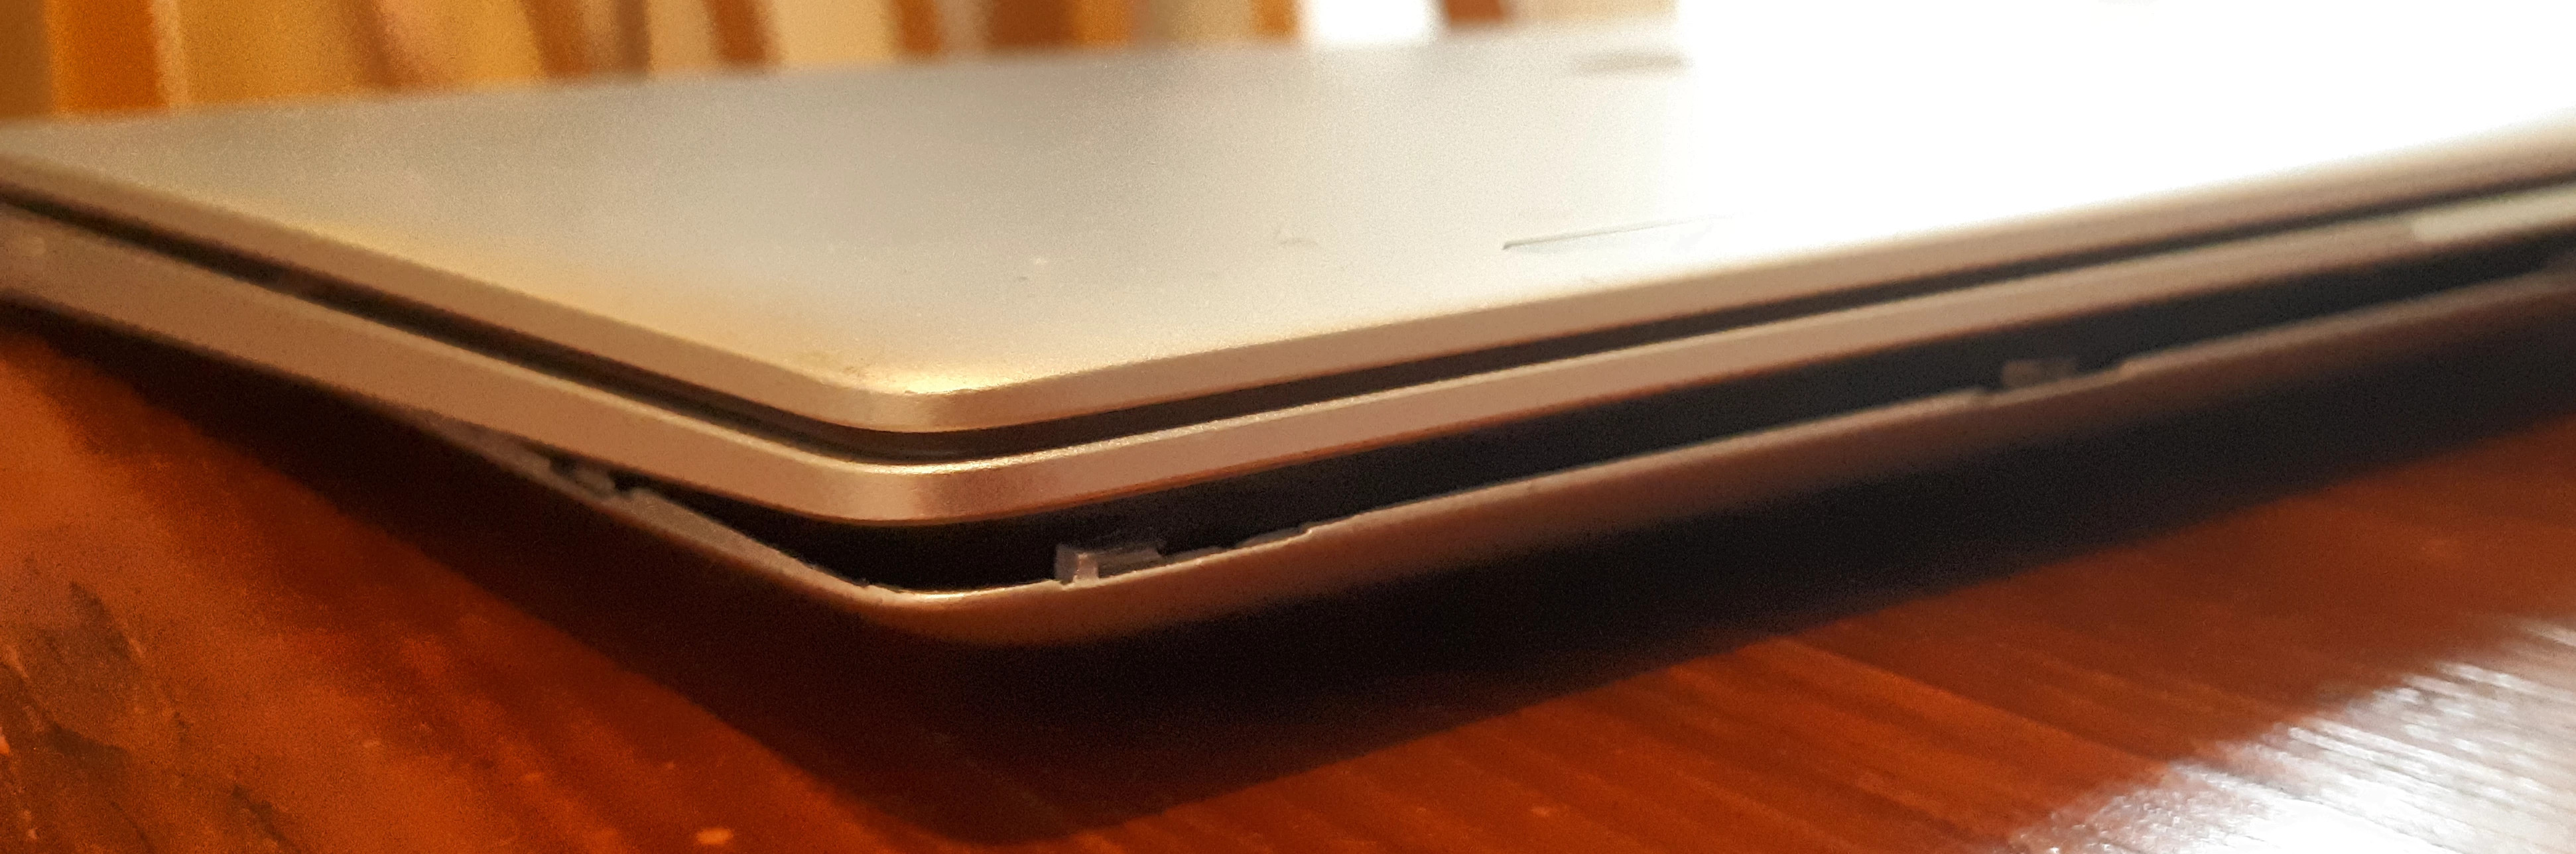 This laptop used to be extra-flat